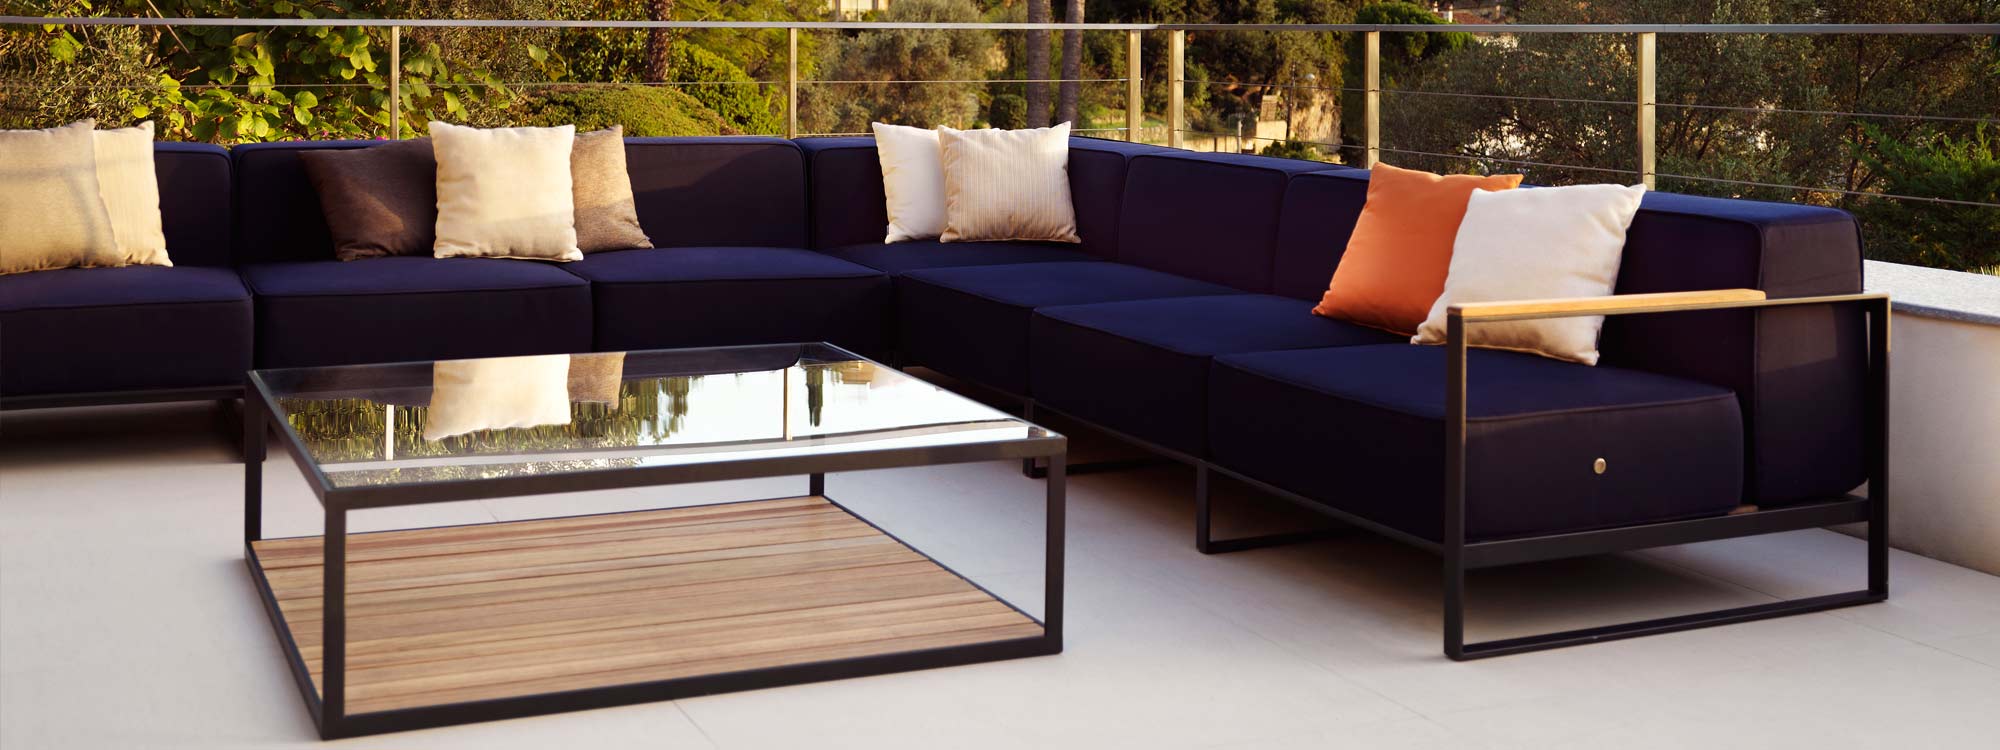 Moore modern garden sofa is a minimalist outdoor sofa in luxury quality garden furniture materials by Roshults designer exterior furniture